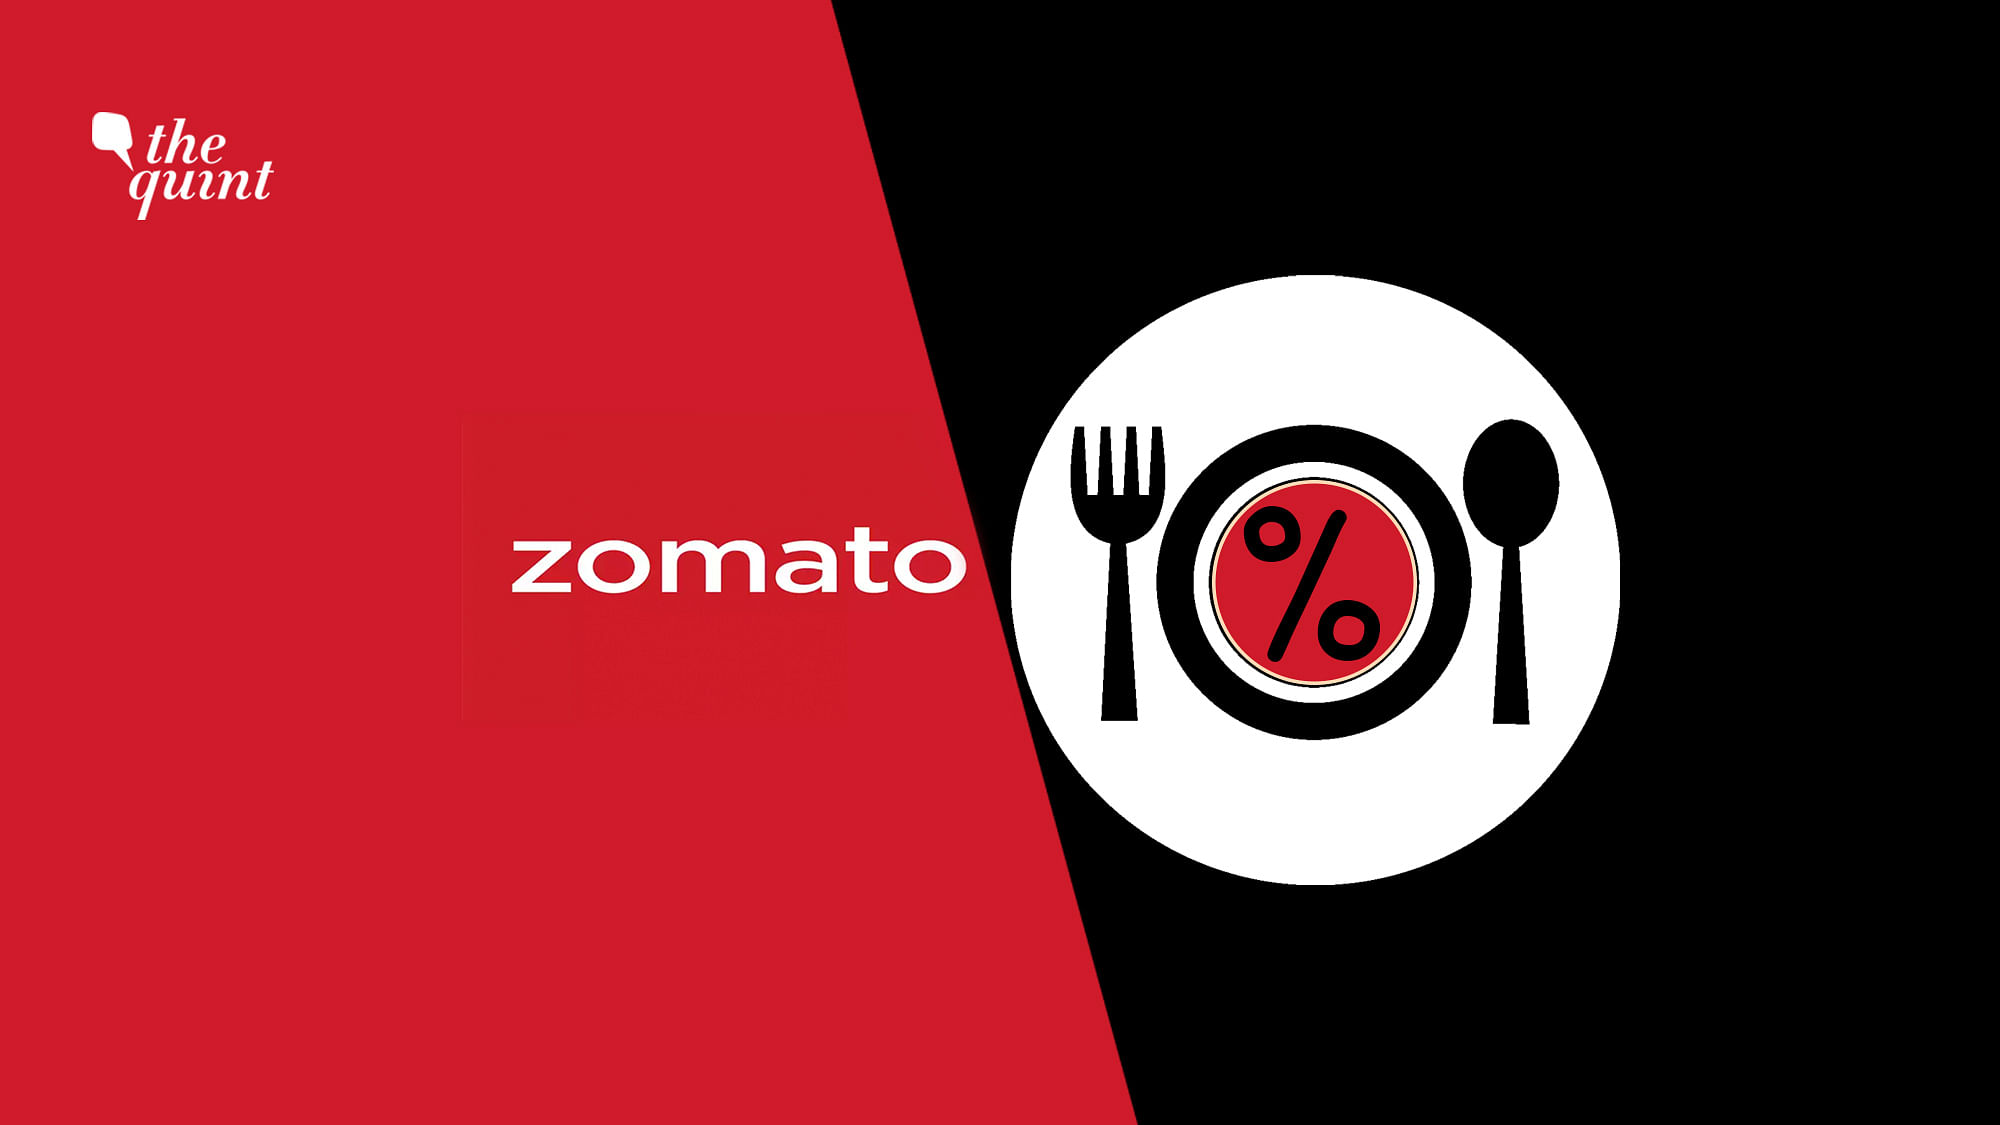 Zomato Gold will expand to delivery soon.